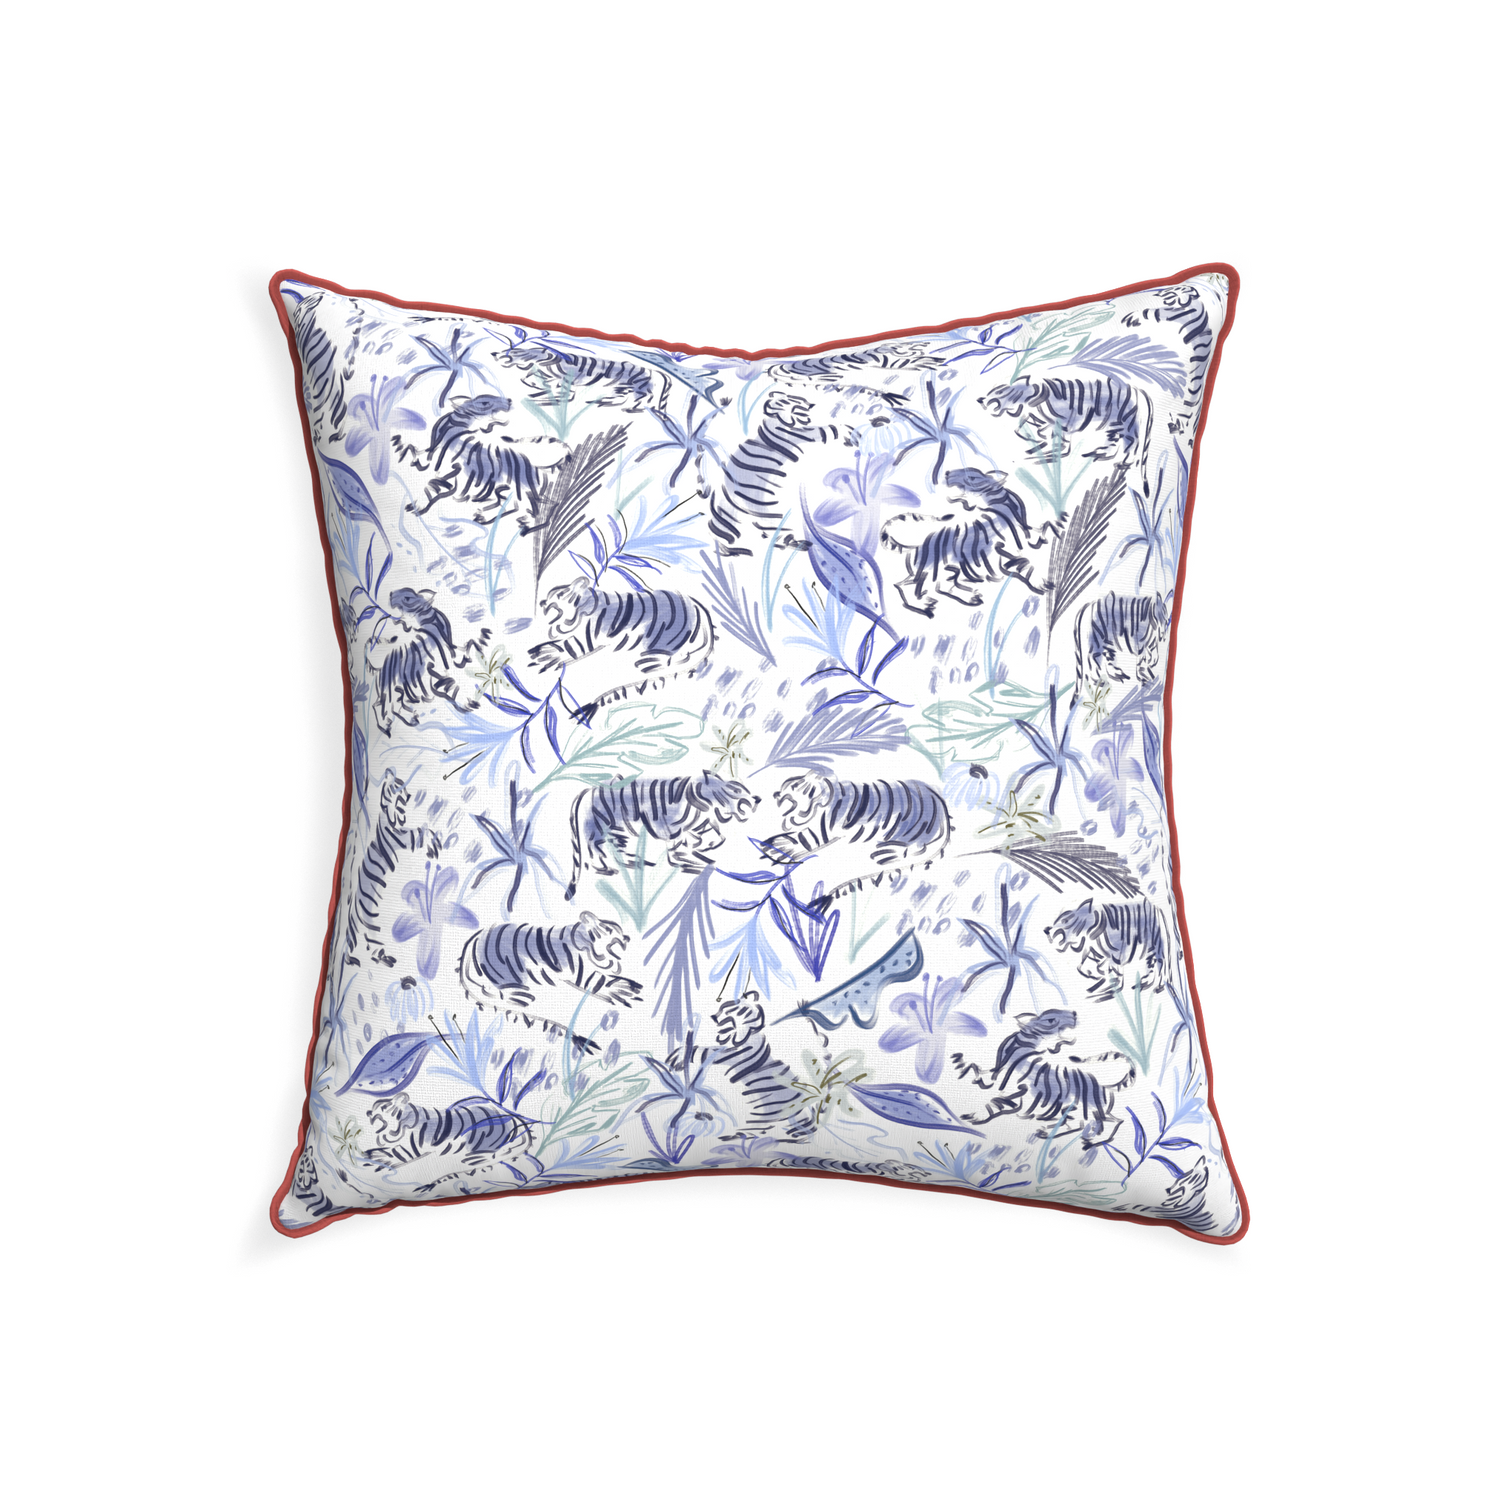 22-square frida blue custom blue with intricate tiger designpillow with c piping on white background